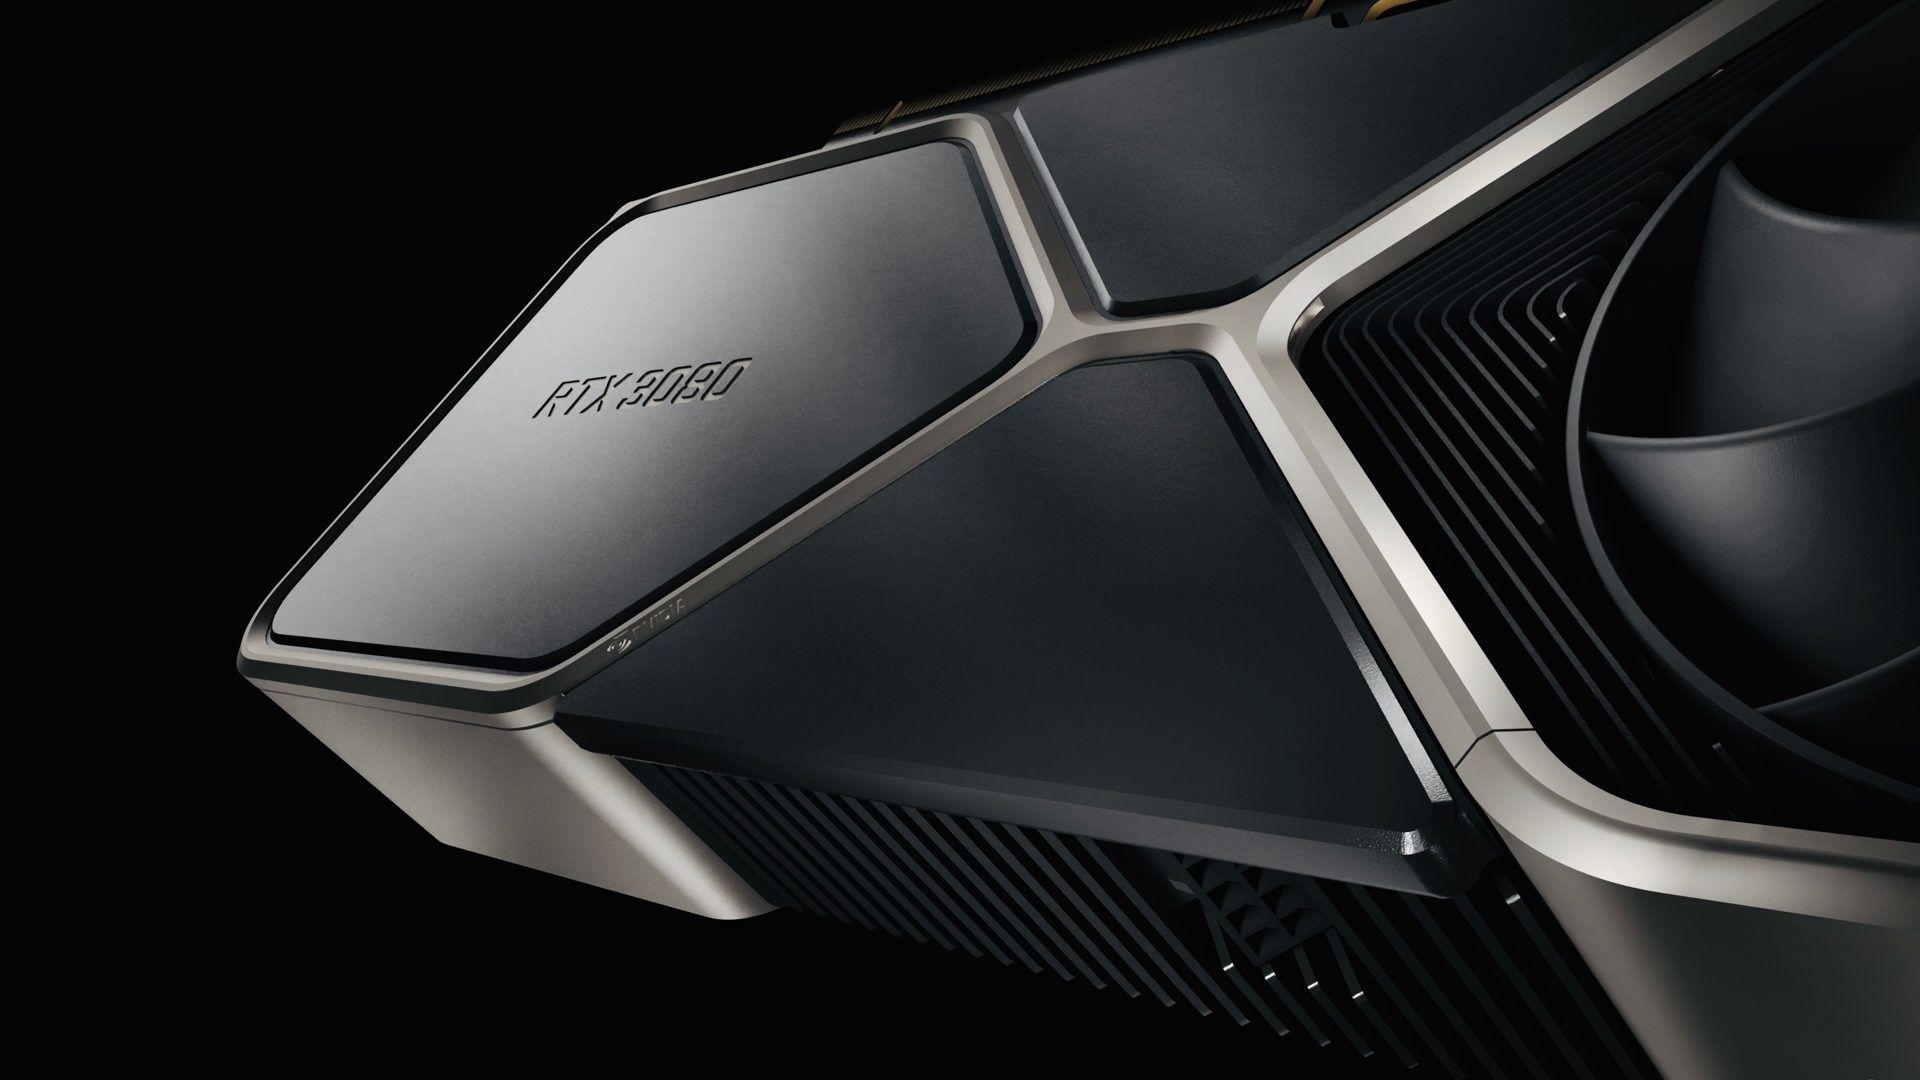 Nvidia Signals RTX 3080 Founders Edition Will Be Back in Stock Next Week